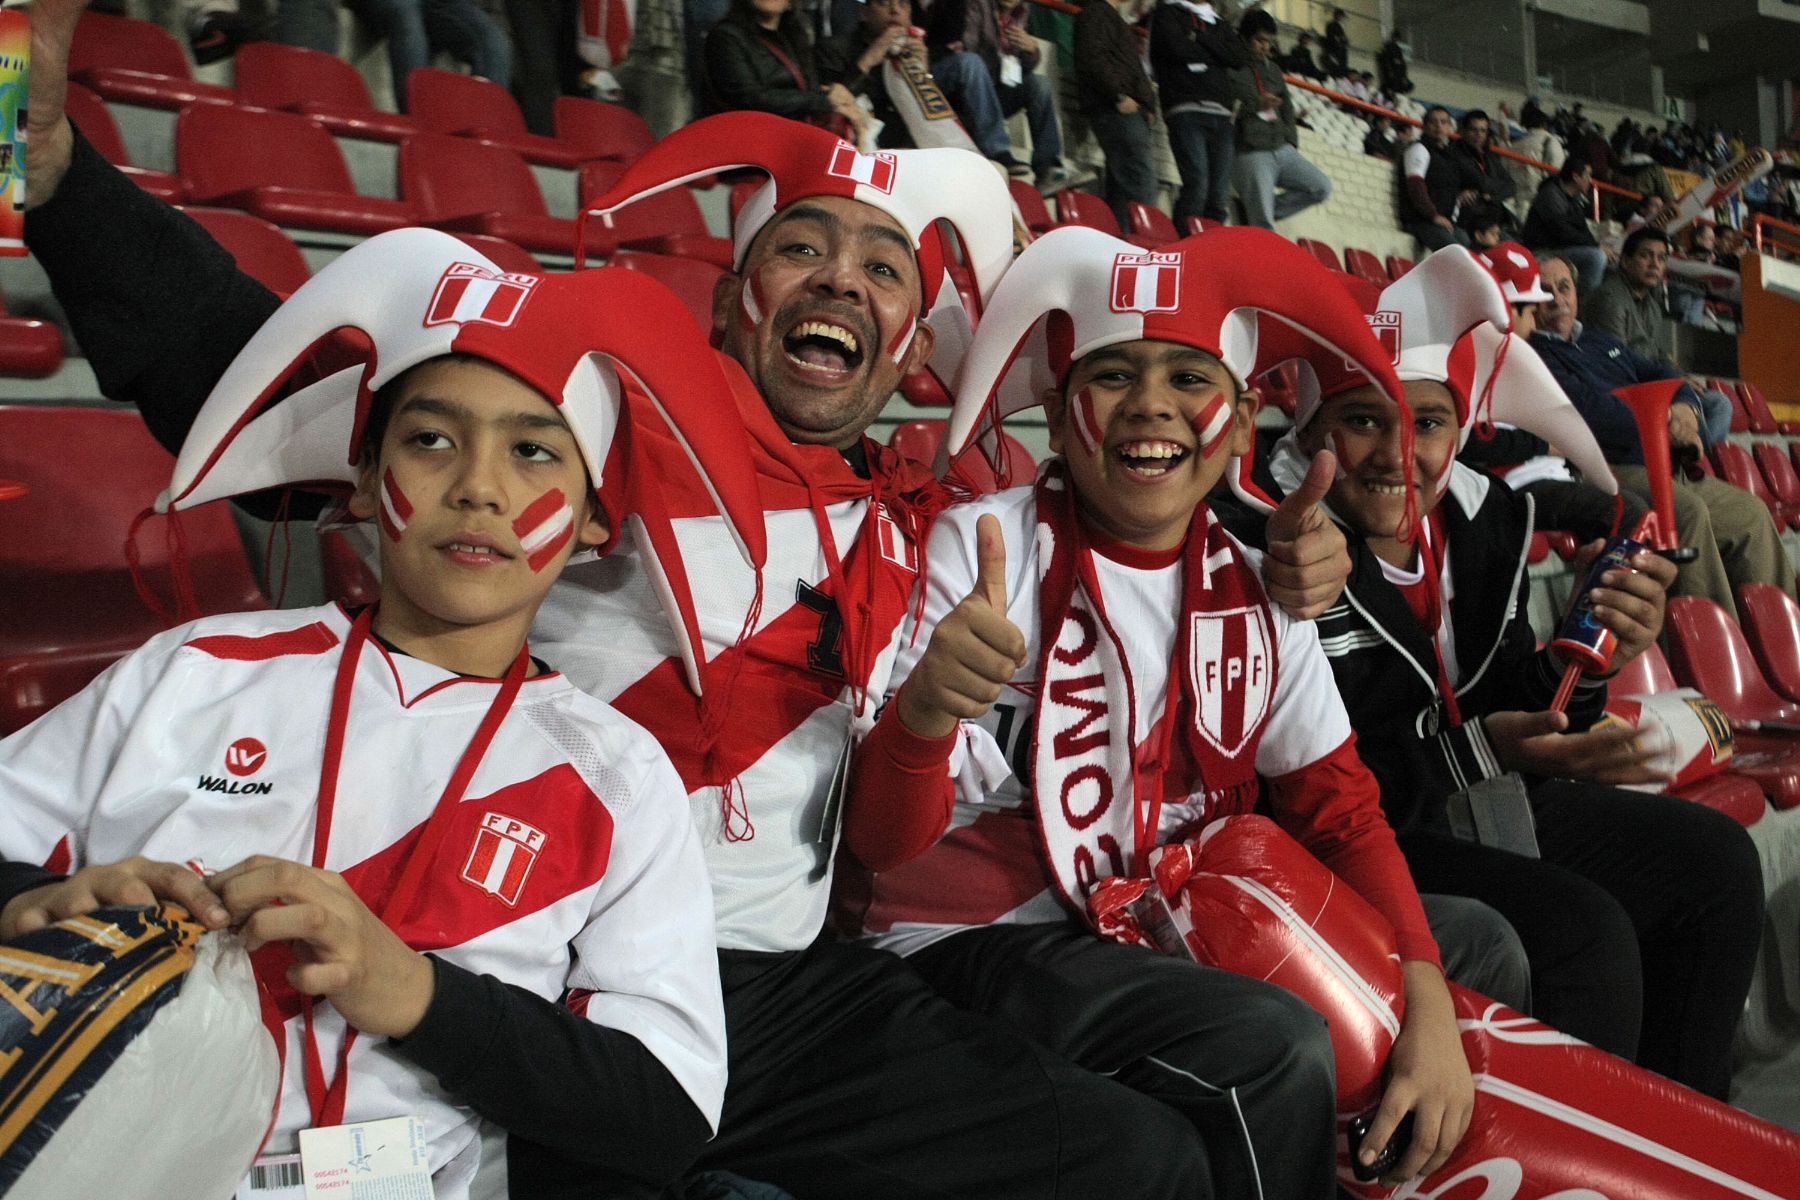 Fans won’t be allowed at Peru’s match against Bolivia on Oct. 15. Photo: ANDINA/Vidal Tarqui